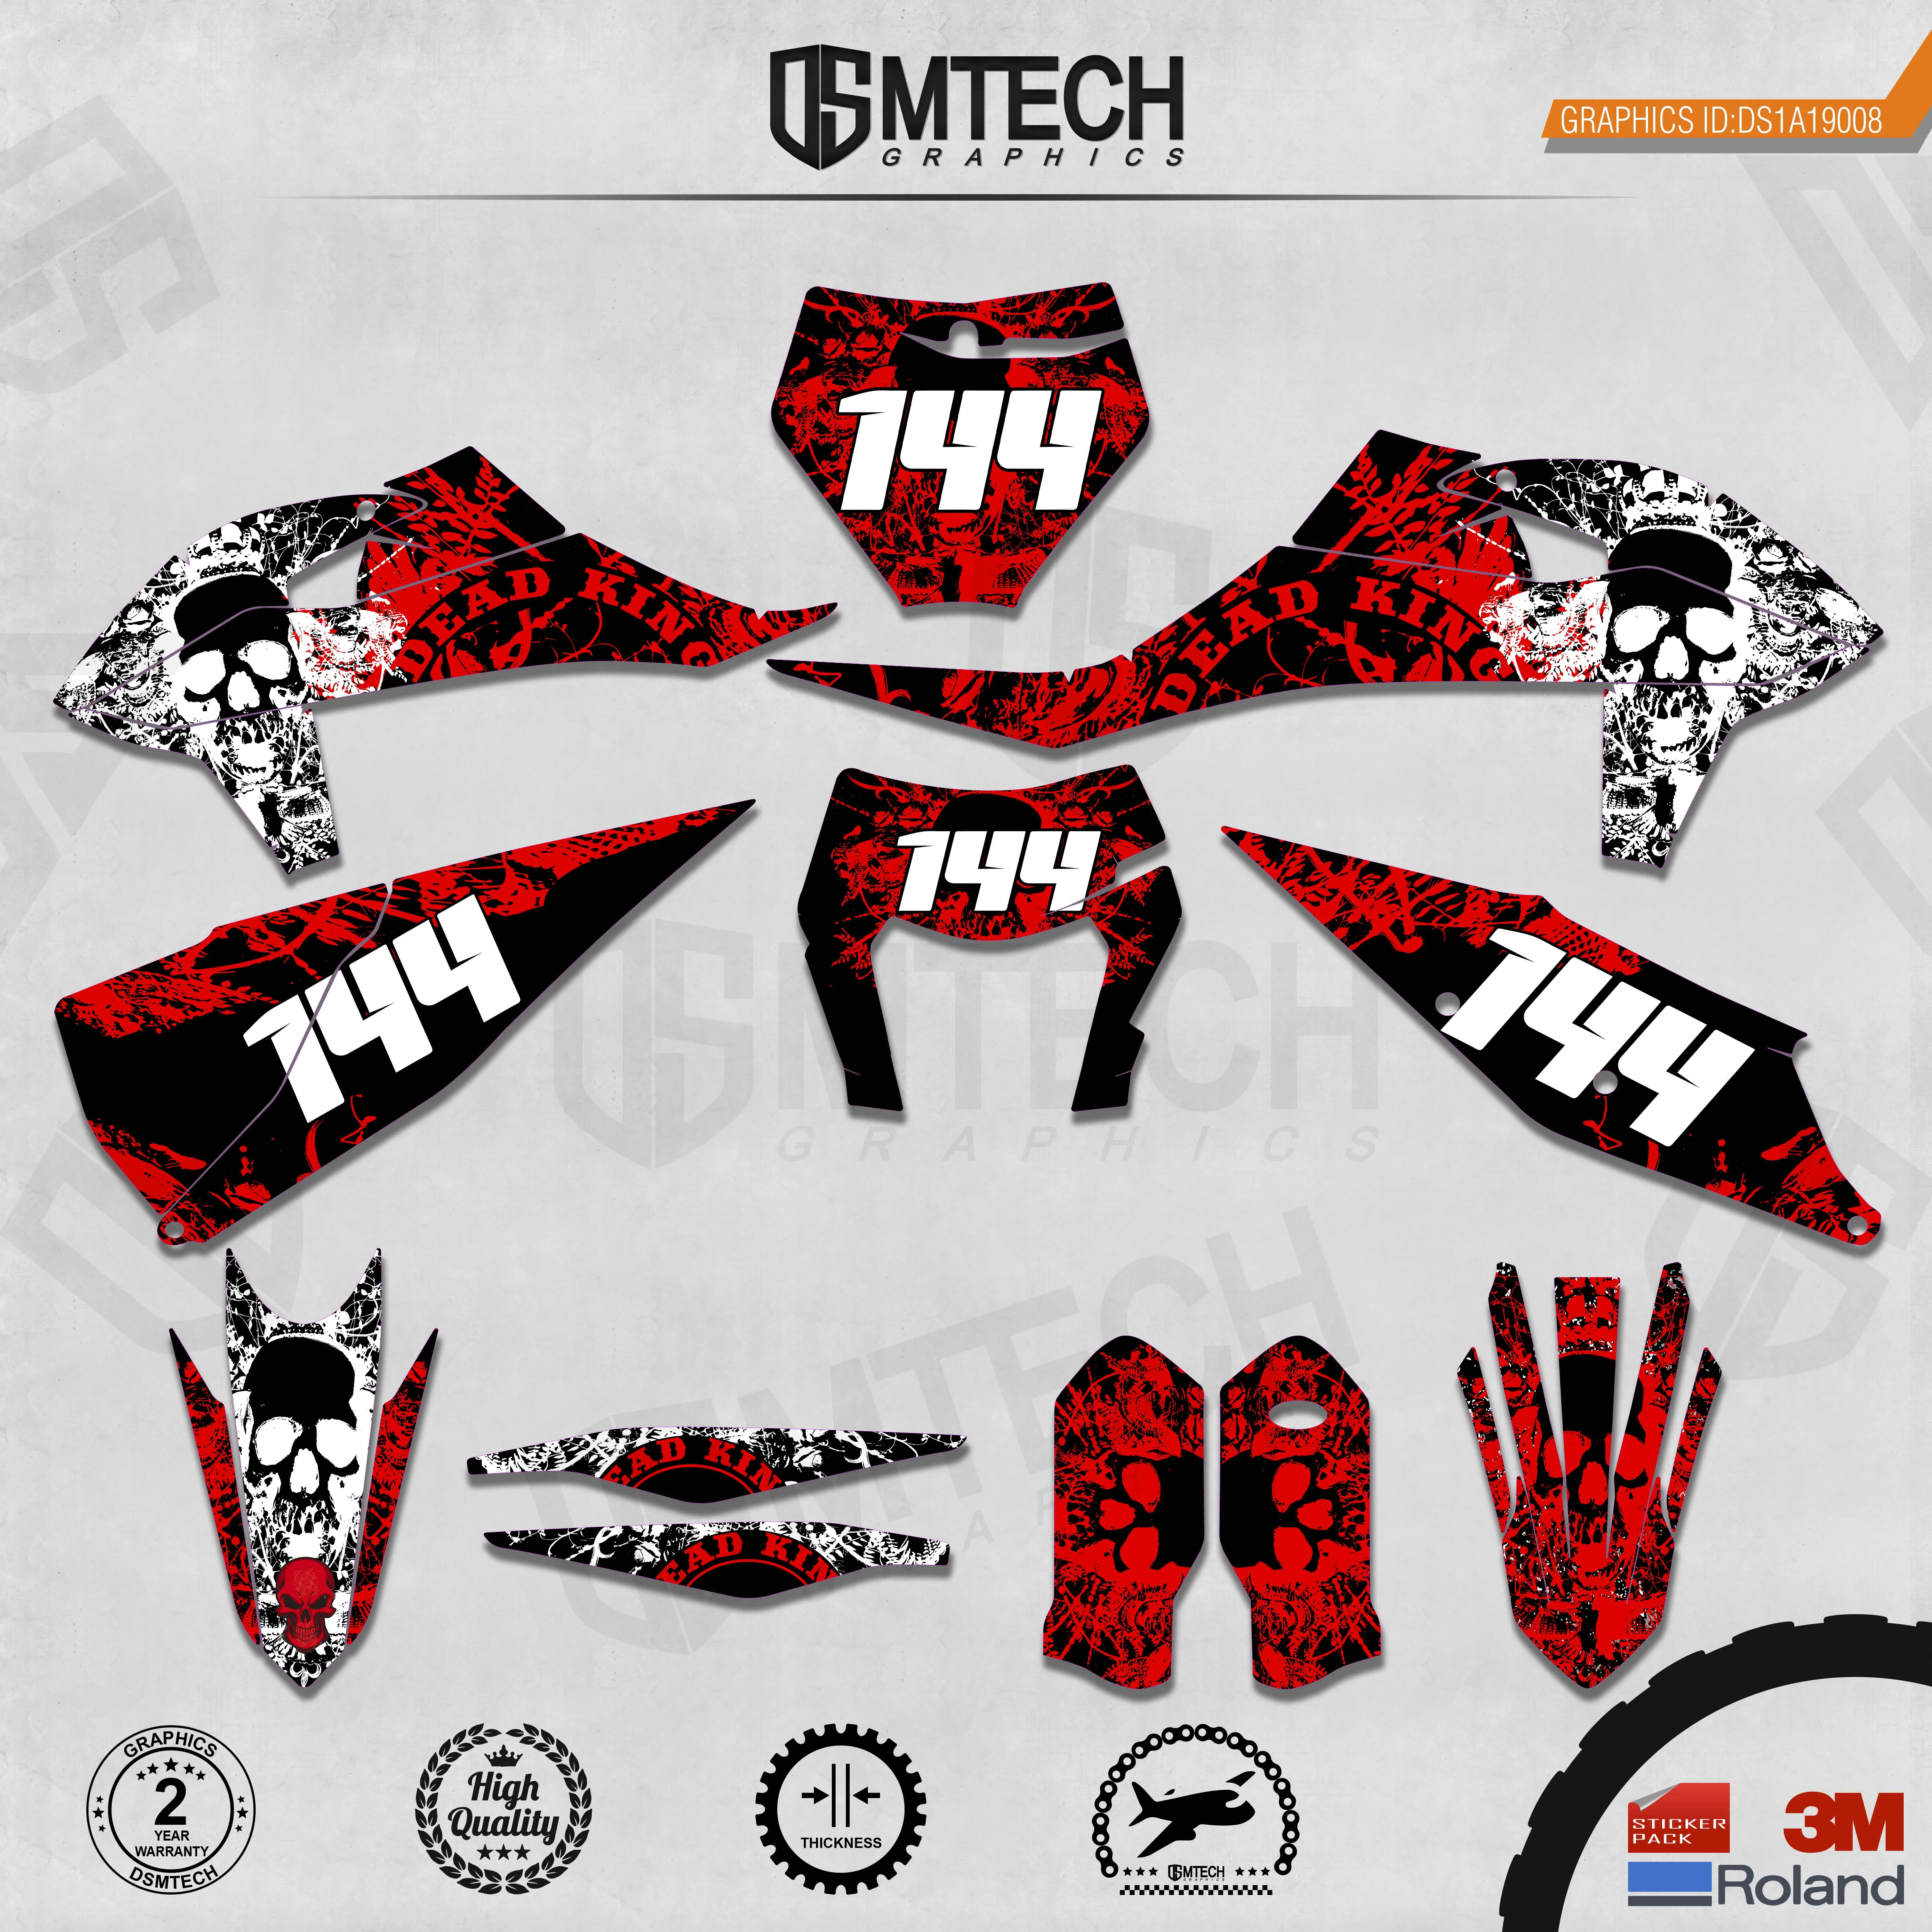 dsmtech-customized-team-graphics-backgrounds-decals-3m-custom-stickers-for-2019-2020-sxf-2020-2021exc-008